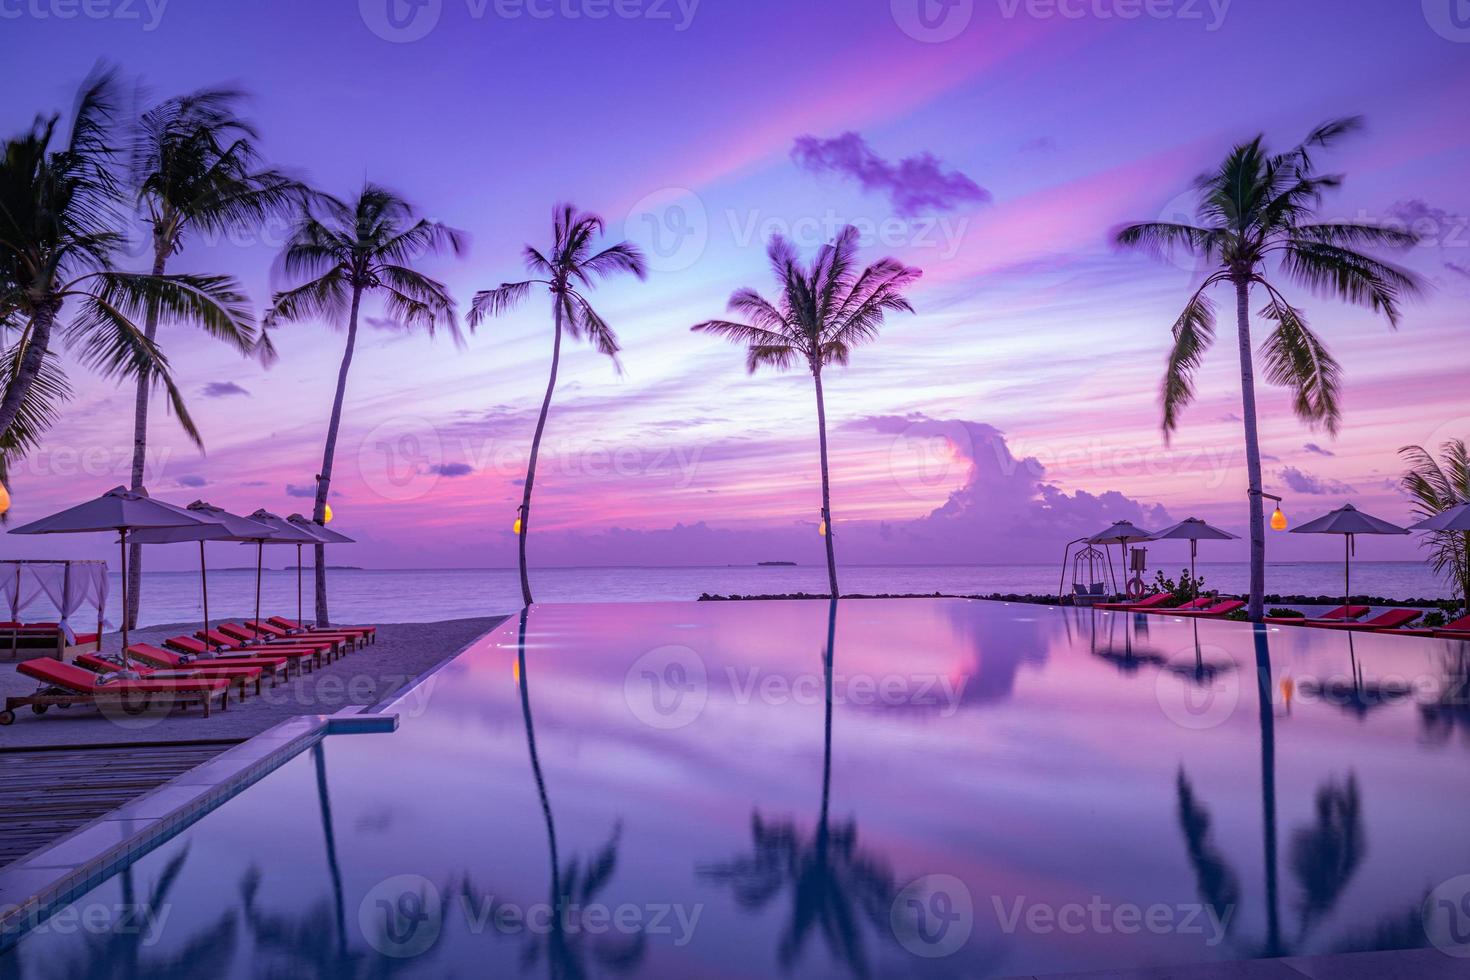 Luxury sunset over infinity pool in a summer beachfront hotel resort at beautiful tropical landscape. Tranquil beach holiday vacation background. Amazing island sunset beach view, palms swimming pool photo